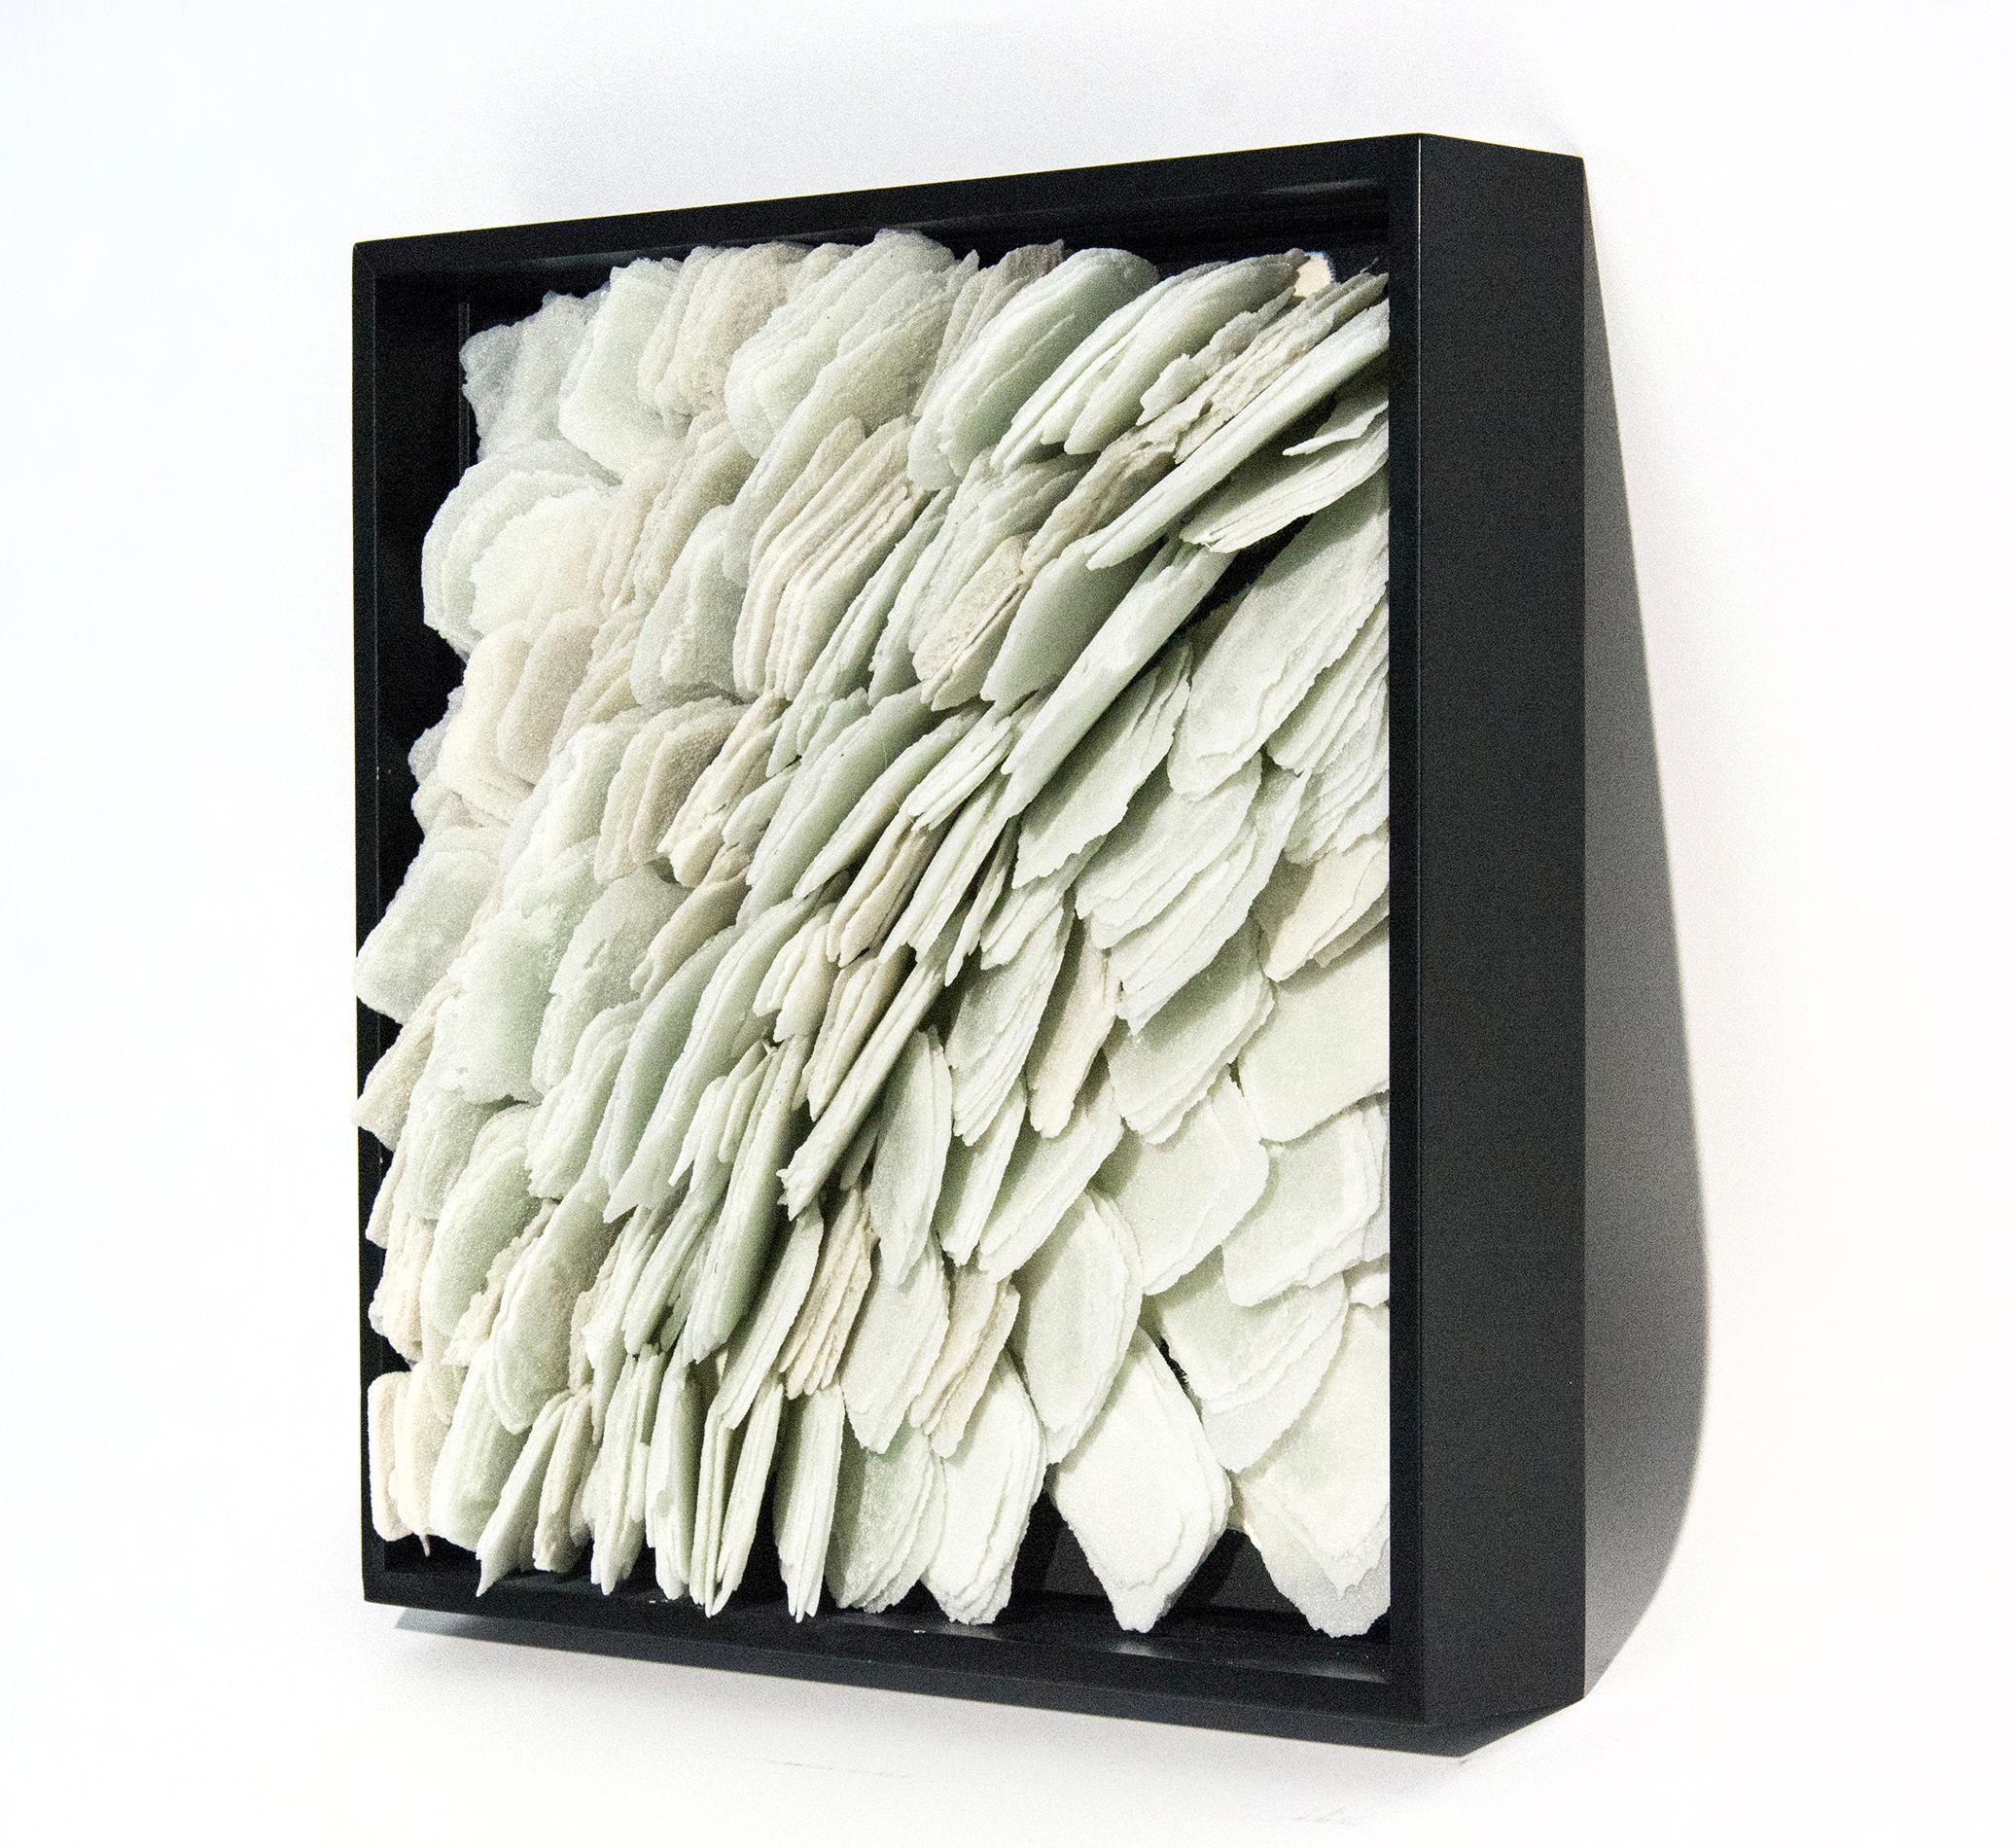 Flow - textured, layered, white, modernist, biomorphic, glass wall sculpture - Contemporary Sculpture by Cheryl Wilson Smith